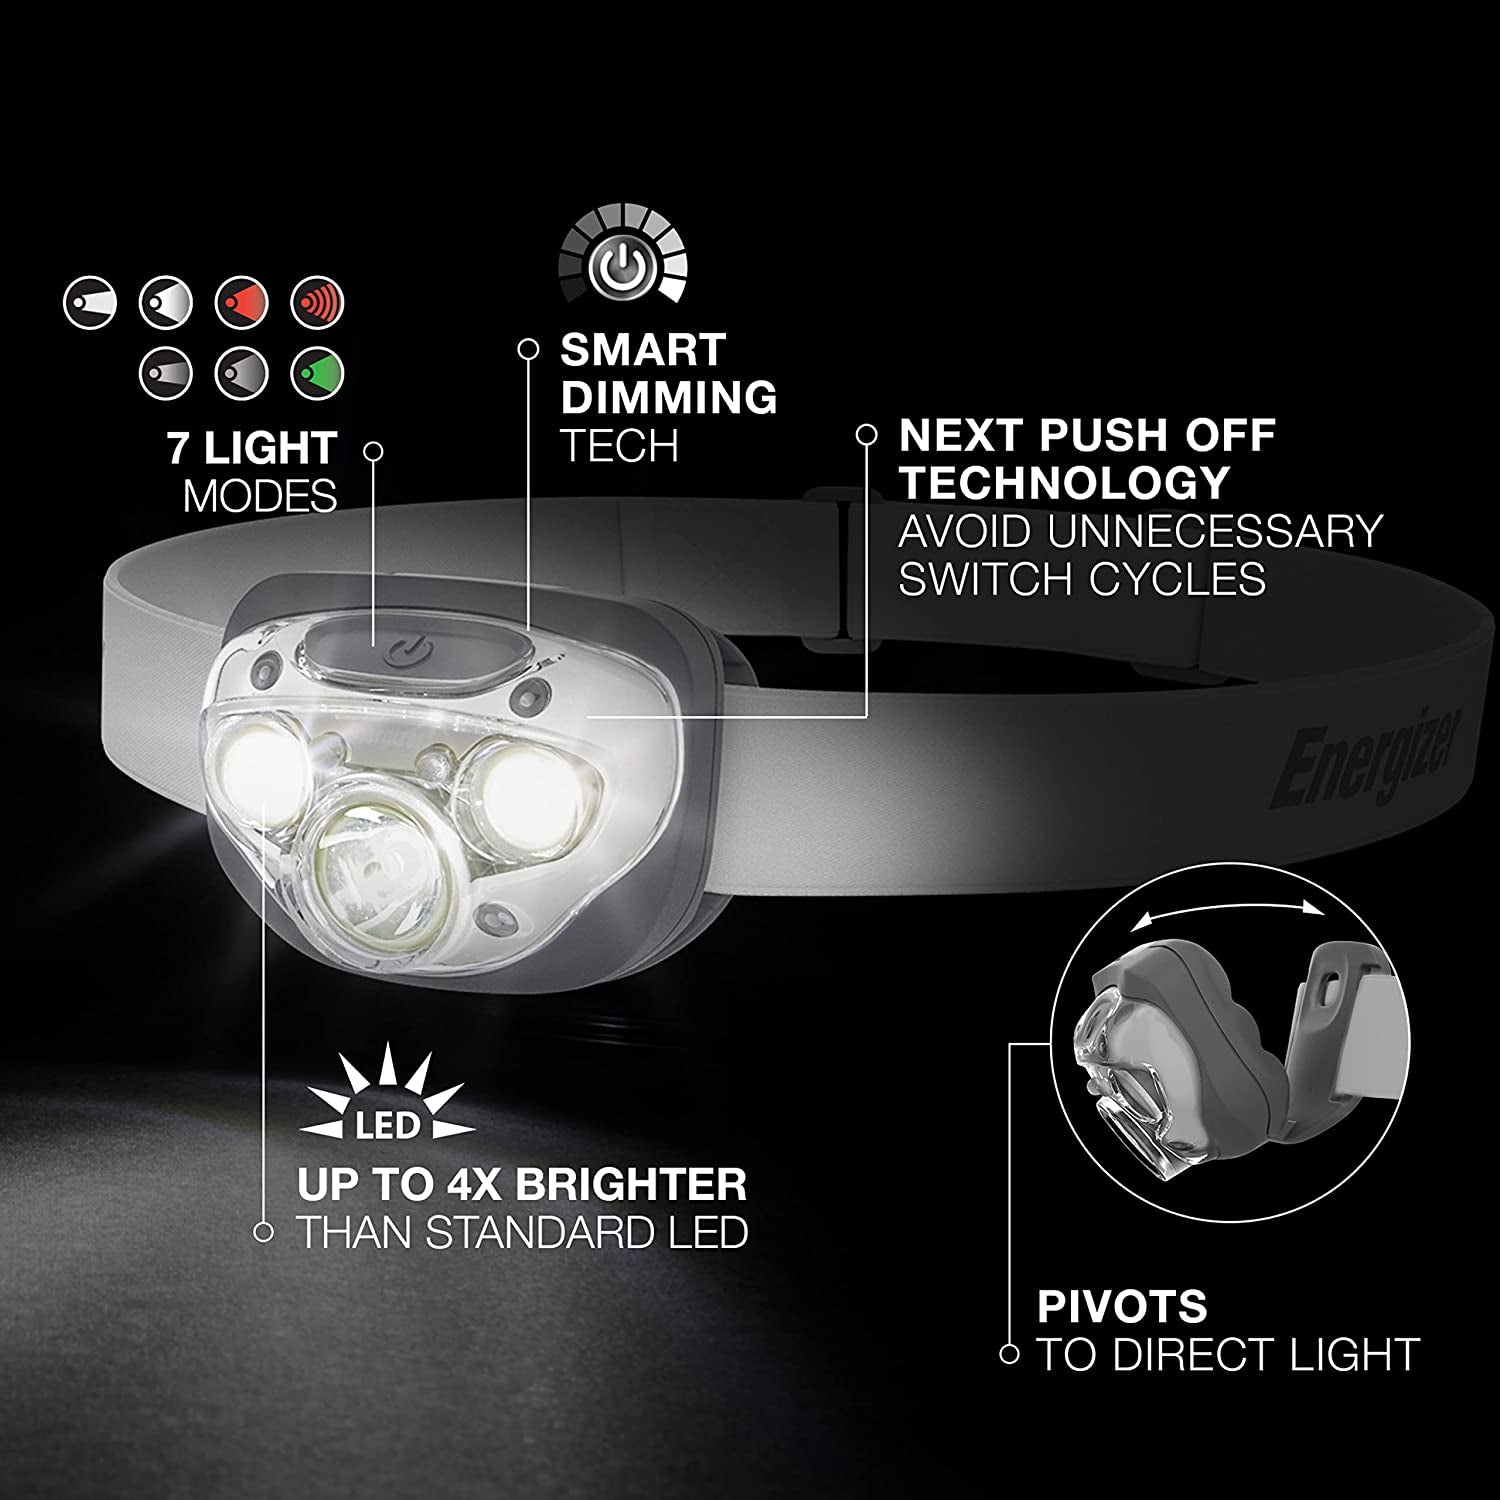 Energizer, Energizer LED Headlamp, High-Performance Outdoor Lighting Gear, IPX4 Water Resistant Headlamps, Bright and Durable, Batteries Included